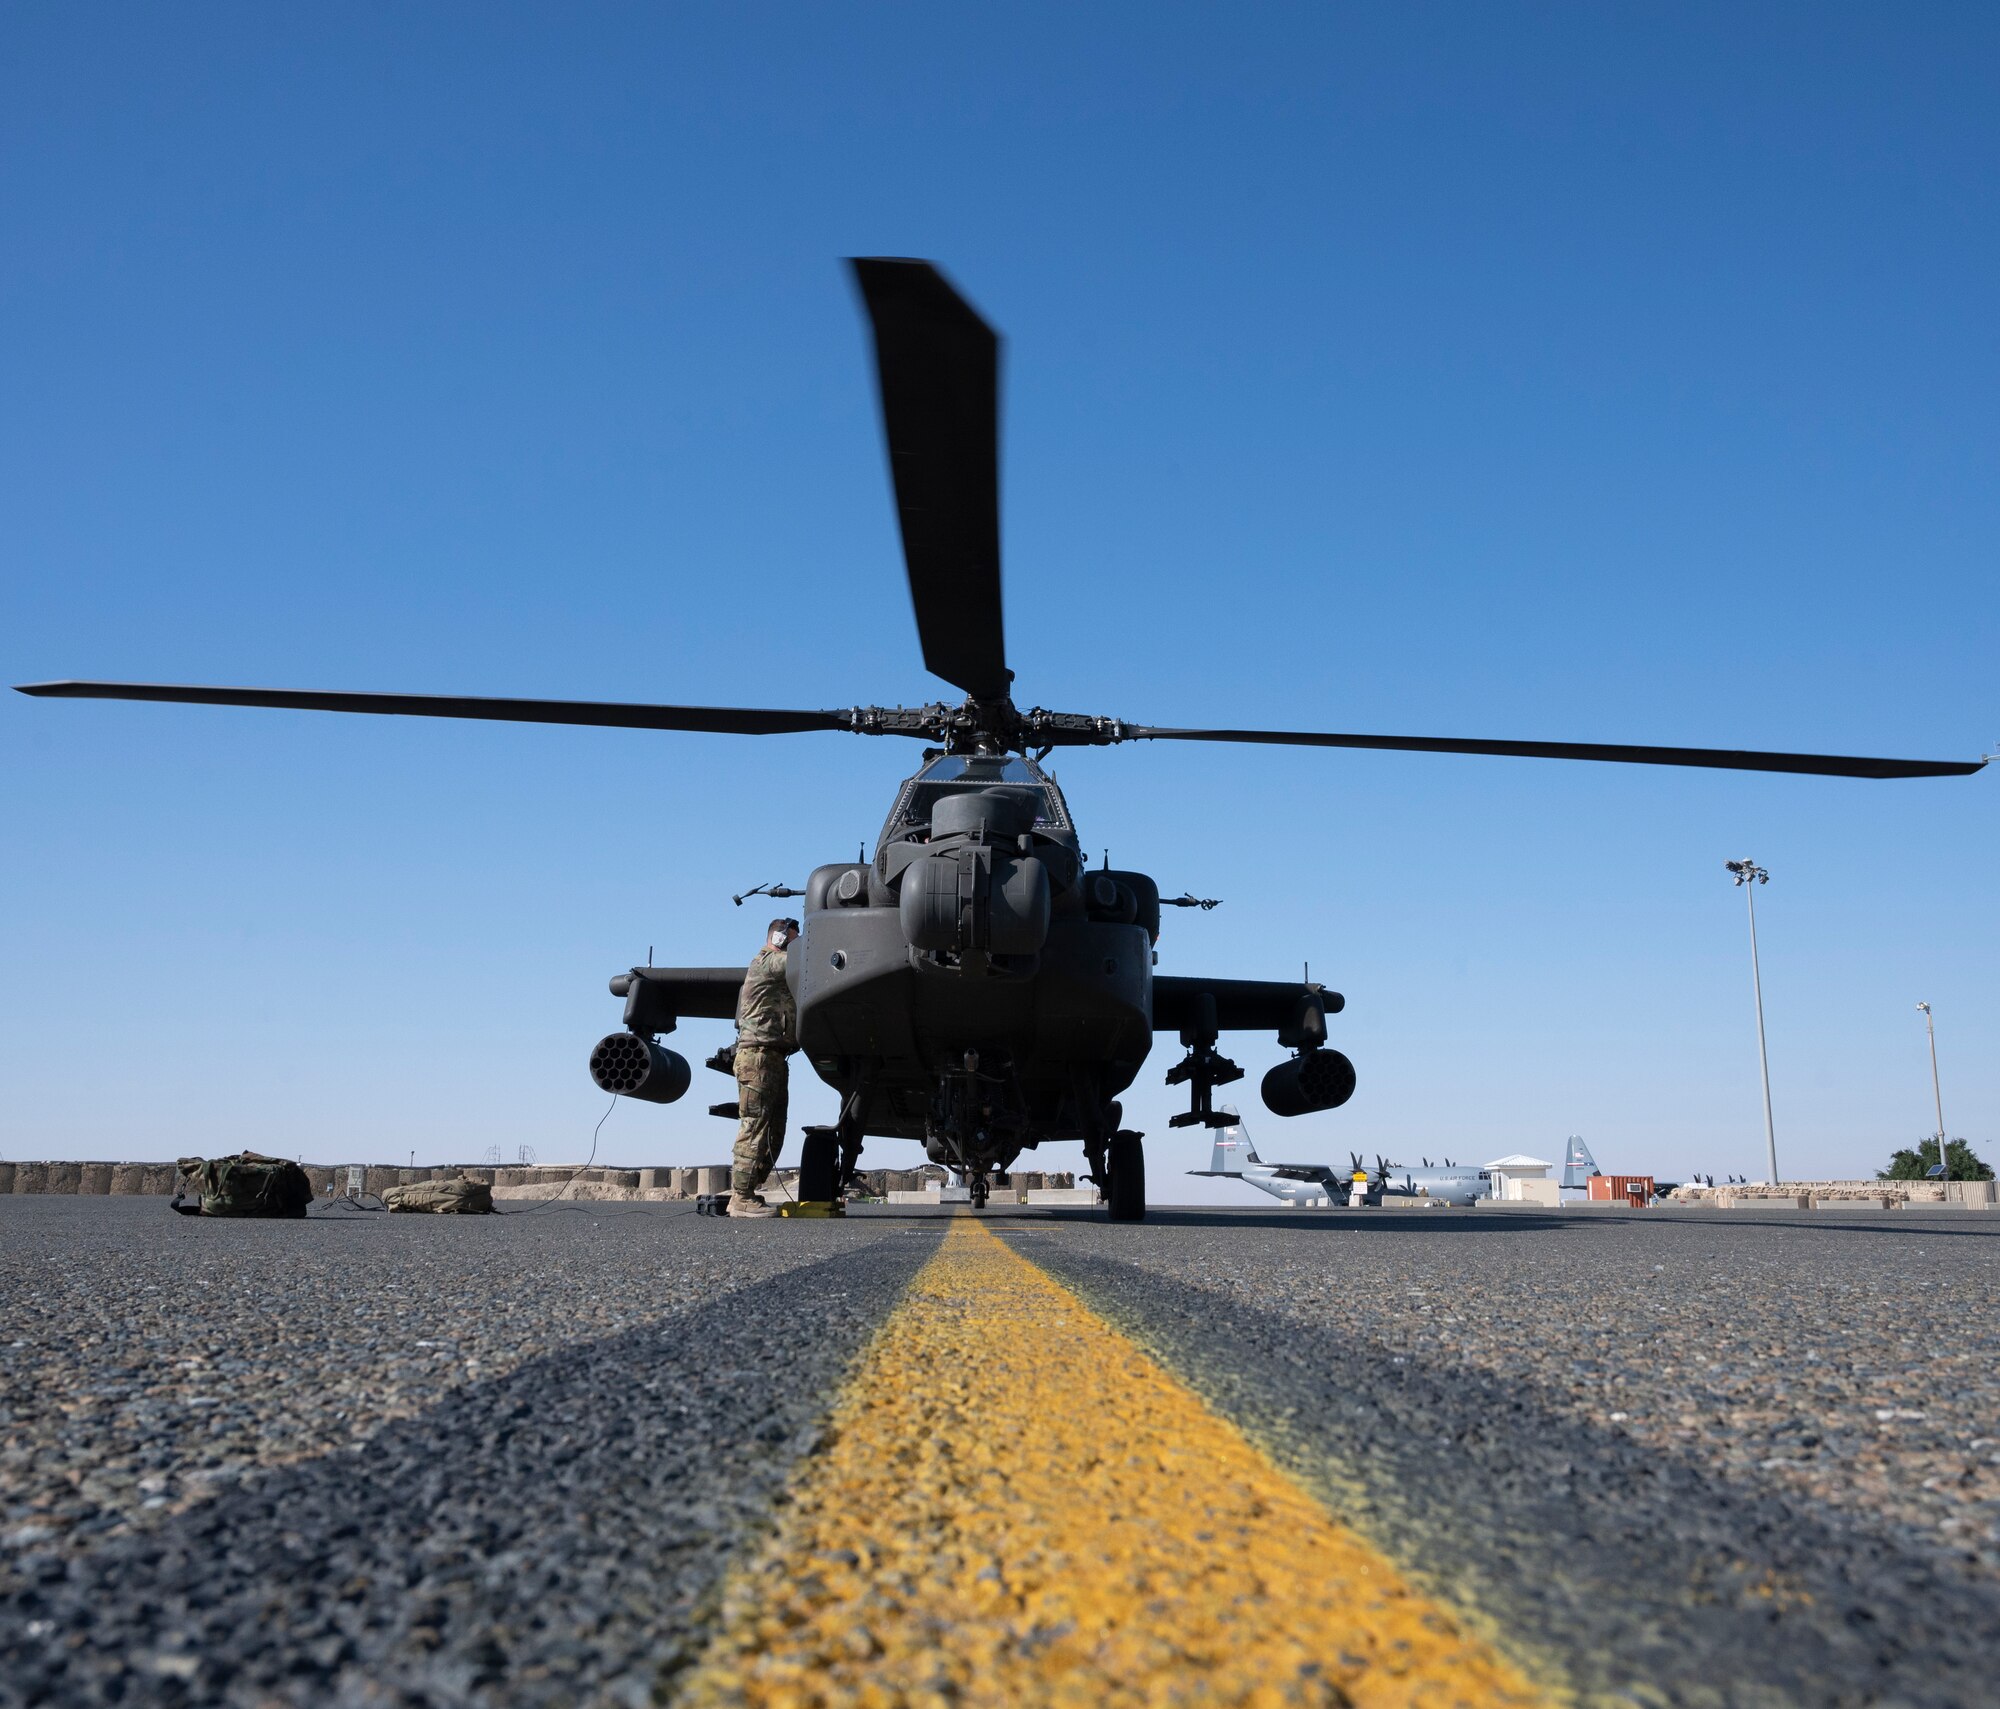 A U.S. Army AH-64E Apache helicopter from Task Force Rough Riders powers down after landing at Ali Al Salem Air Base, Kuwait, Jan. 11, 2023.